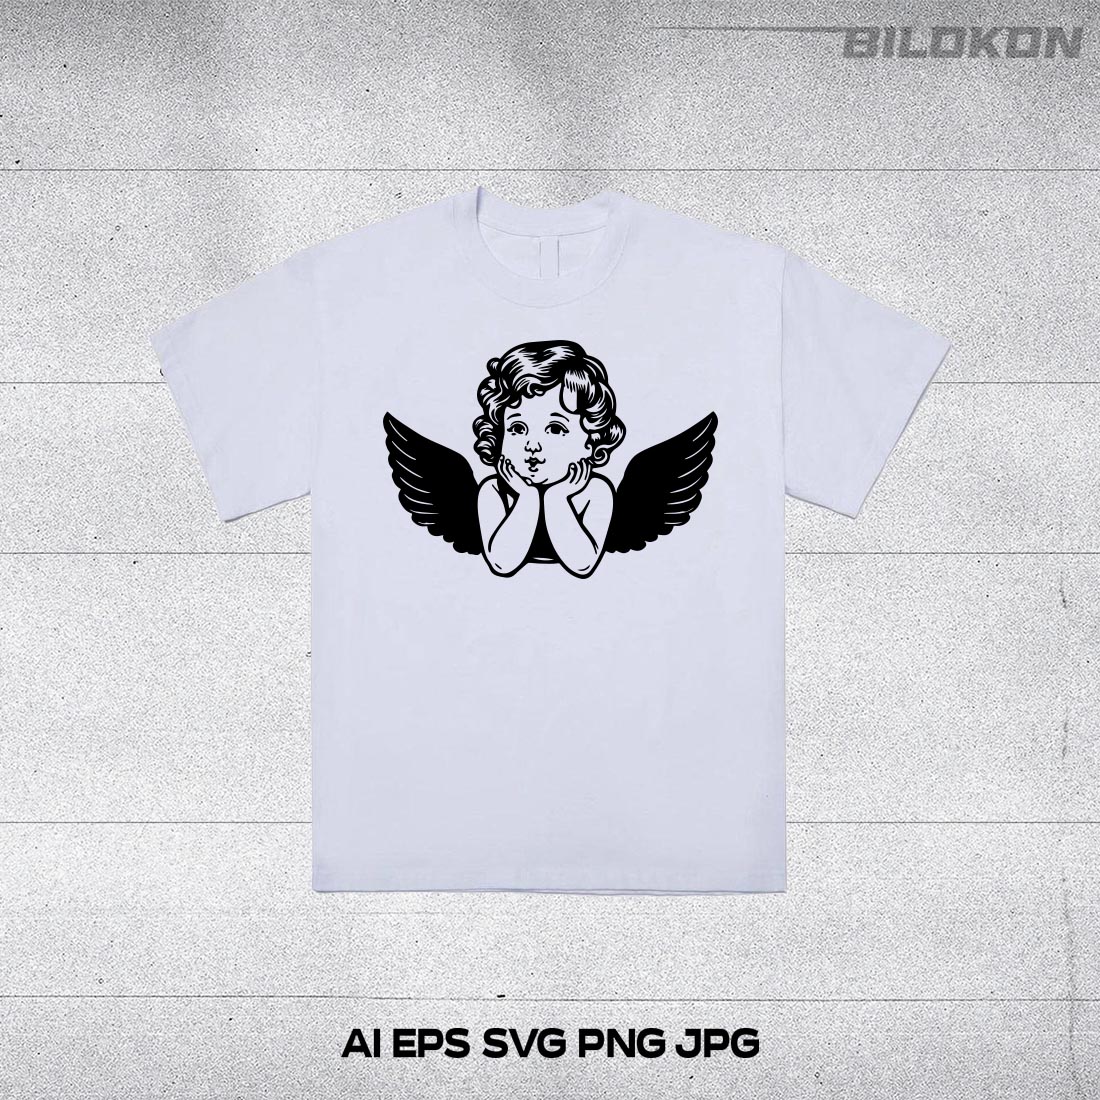 White t - shirt with an image of an angel on it.